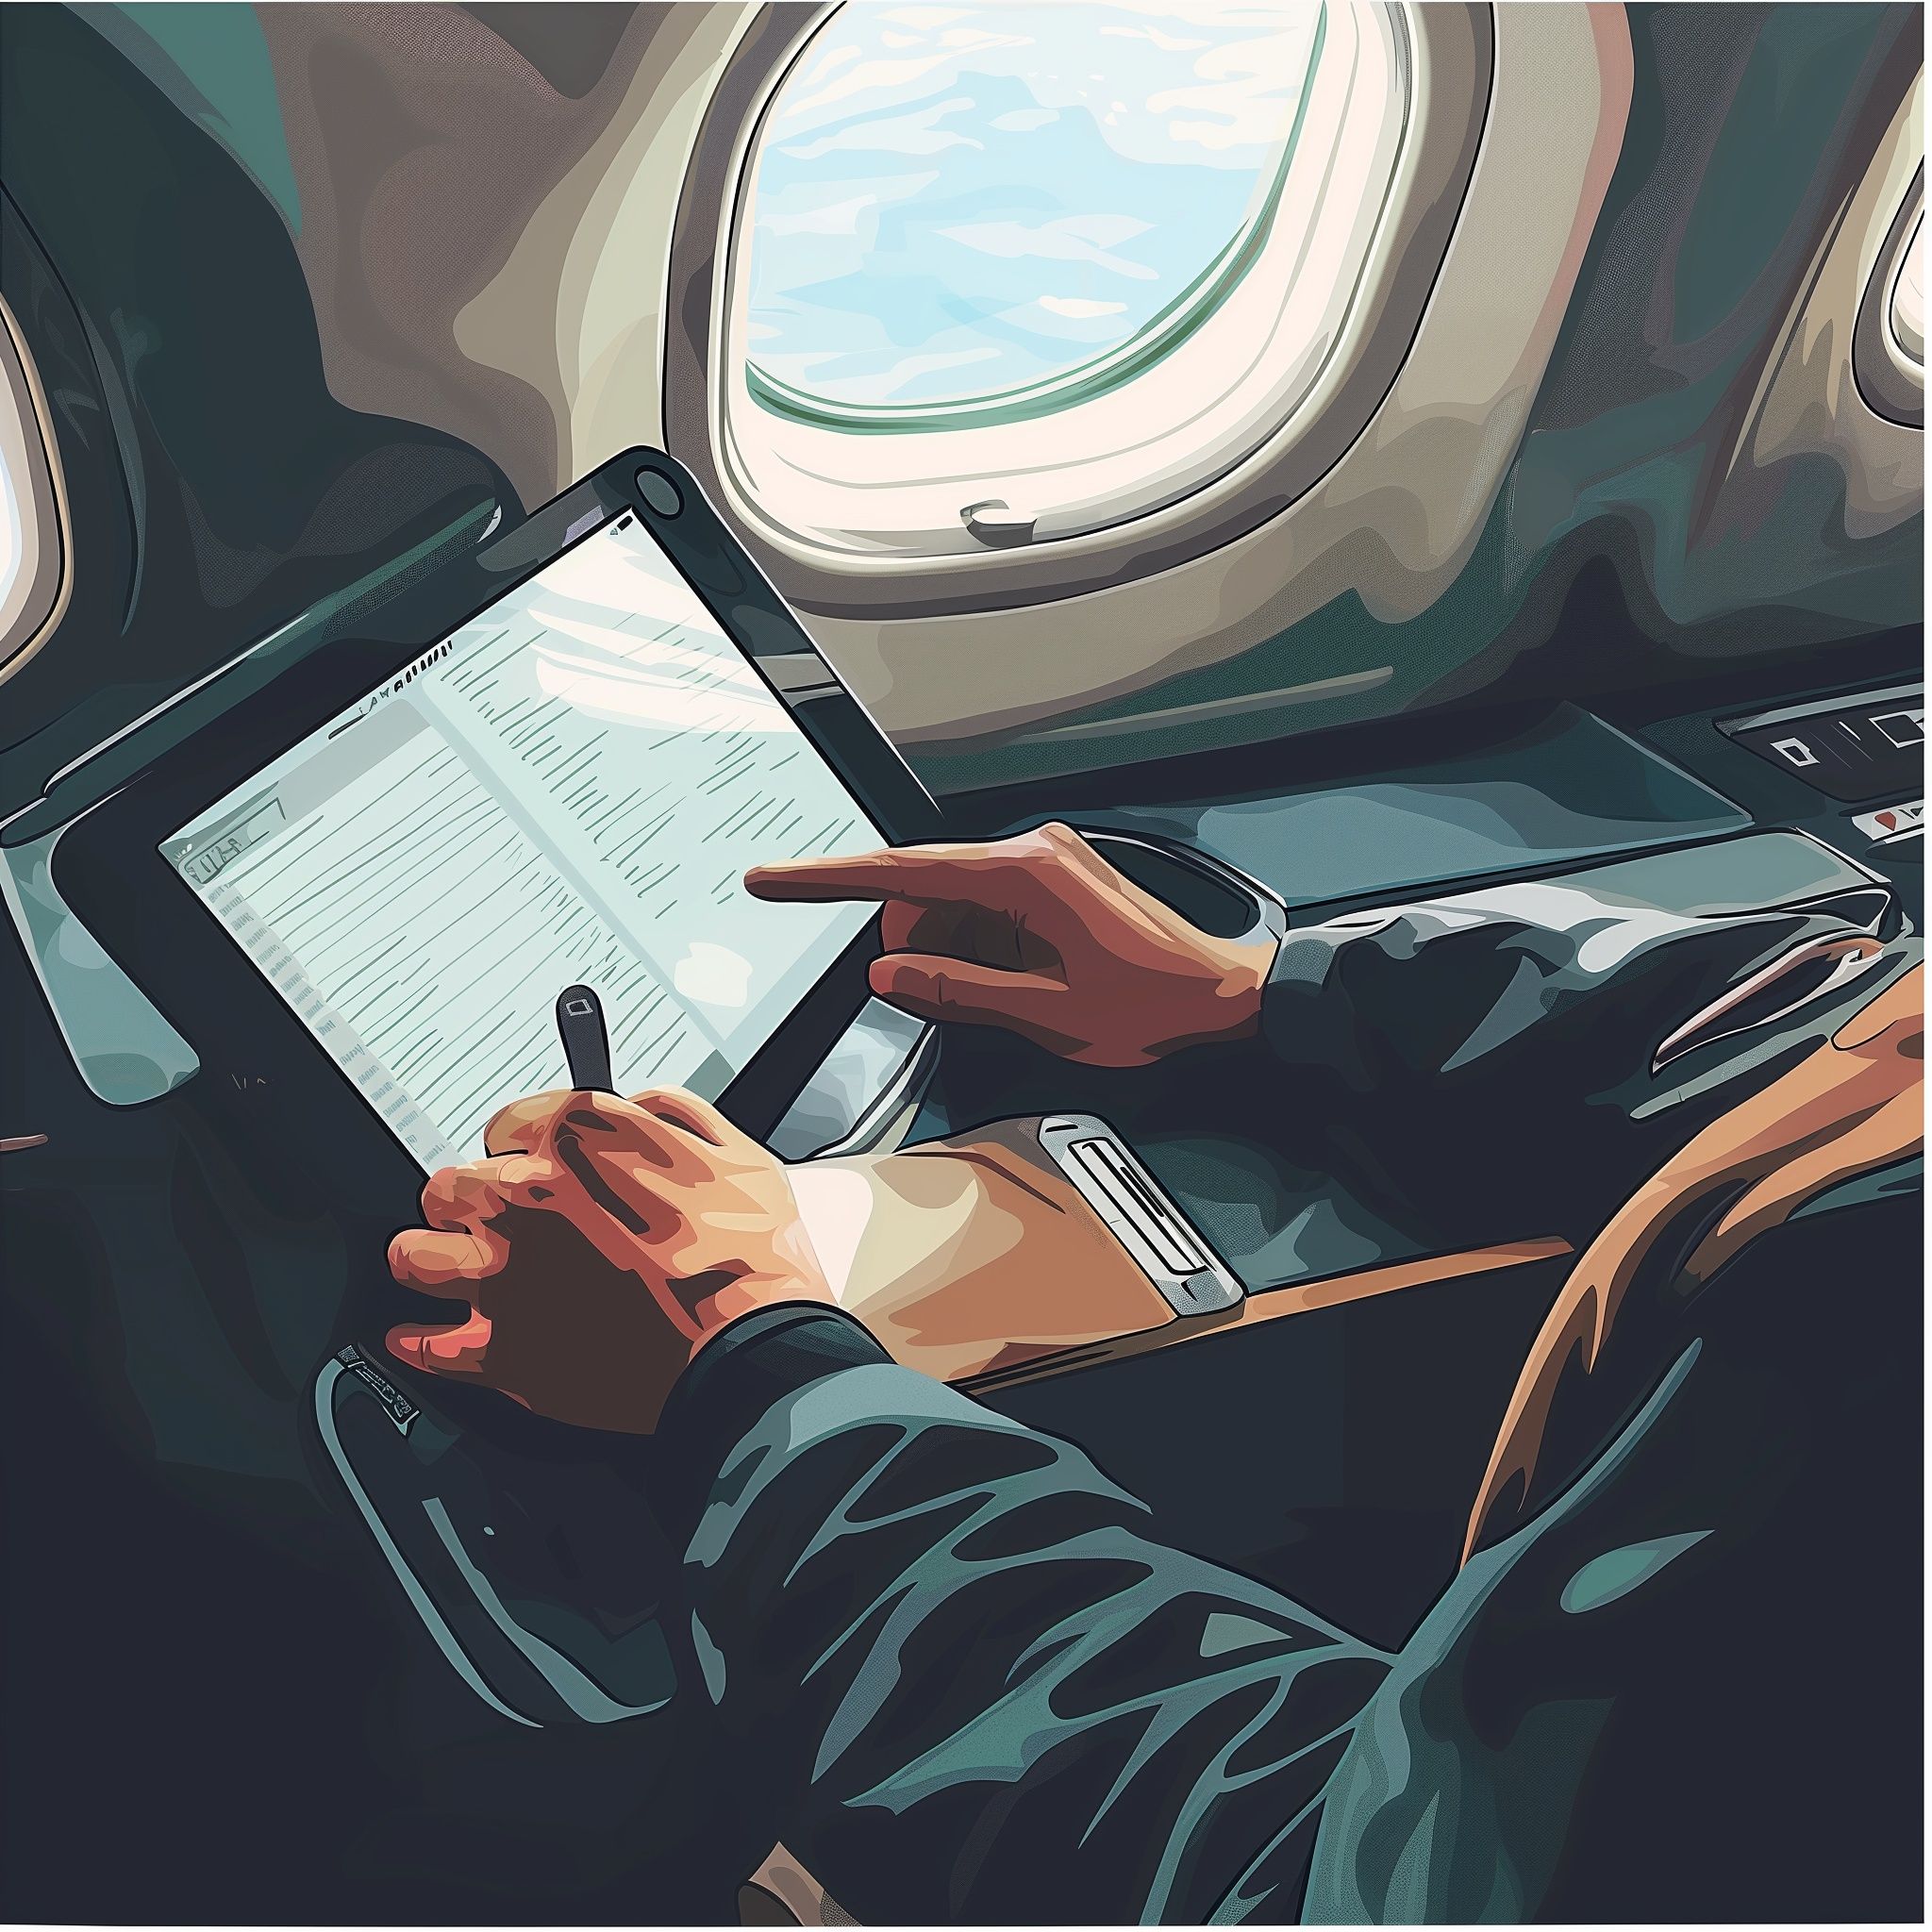 A person on the plane with a tablet